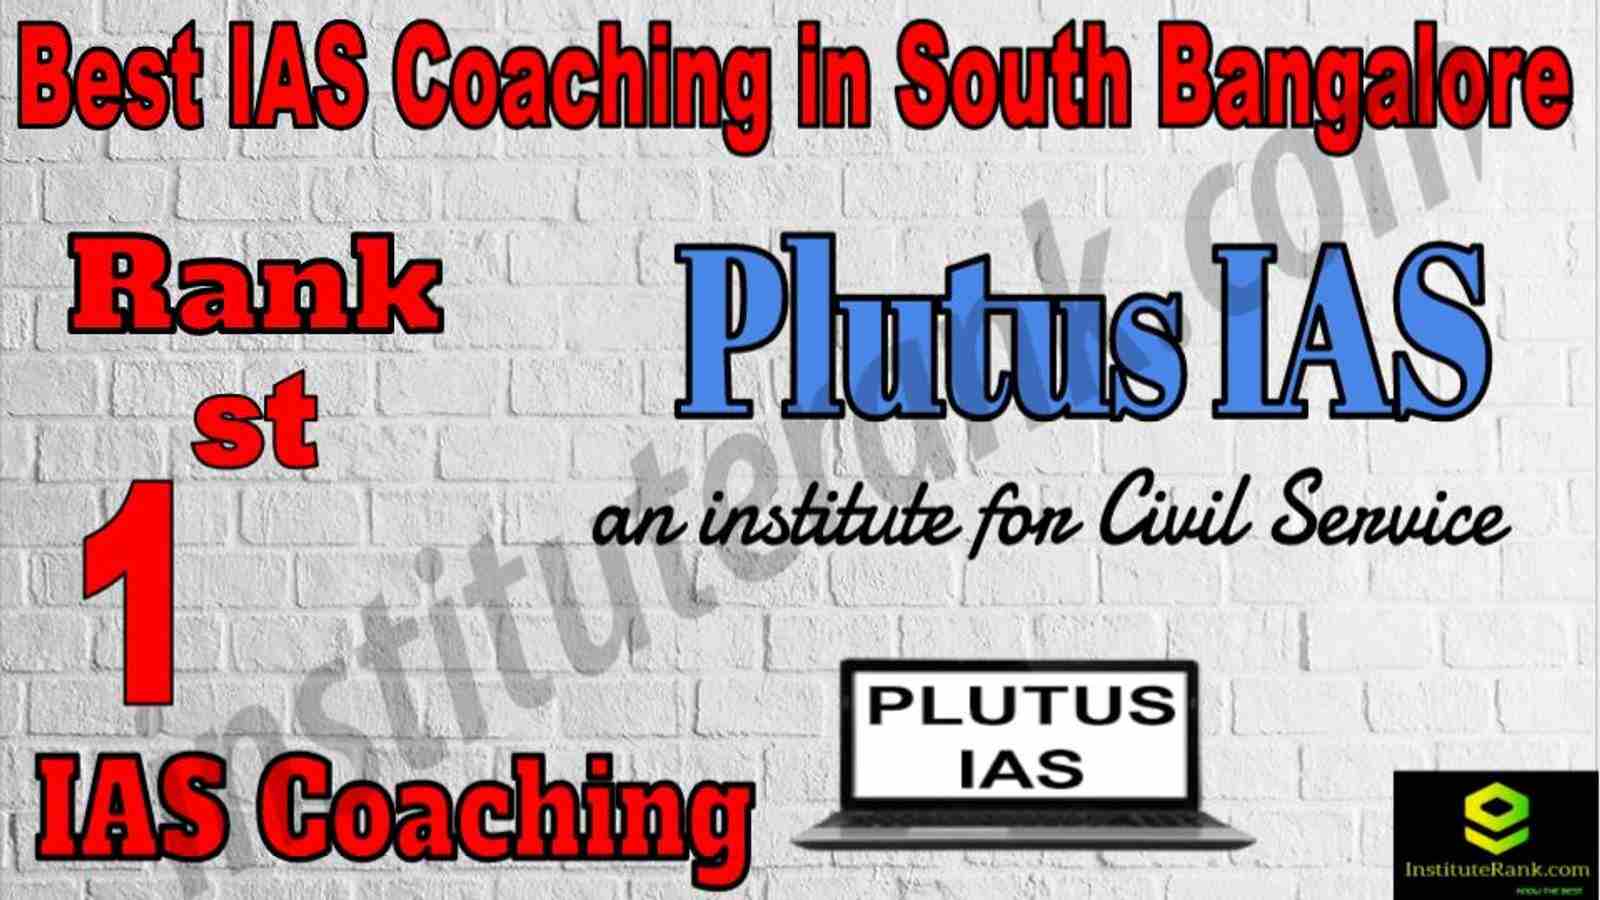 1st Best IAS Coaching in South Bangalore